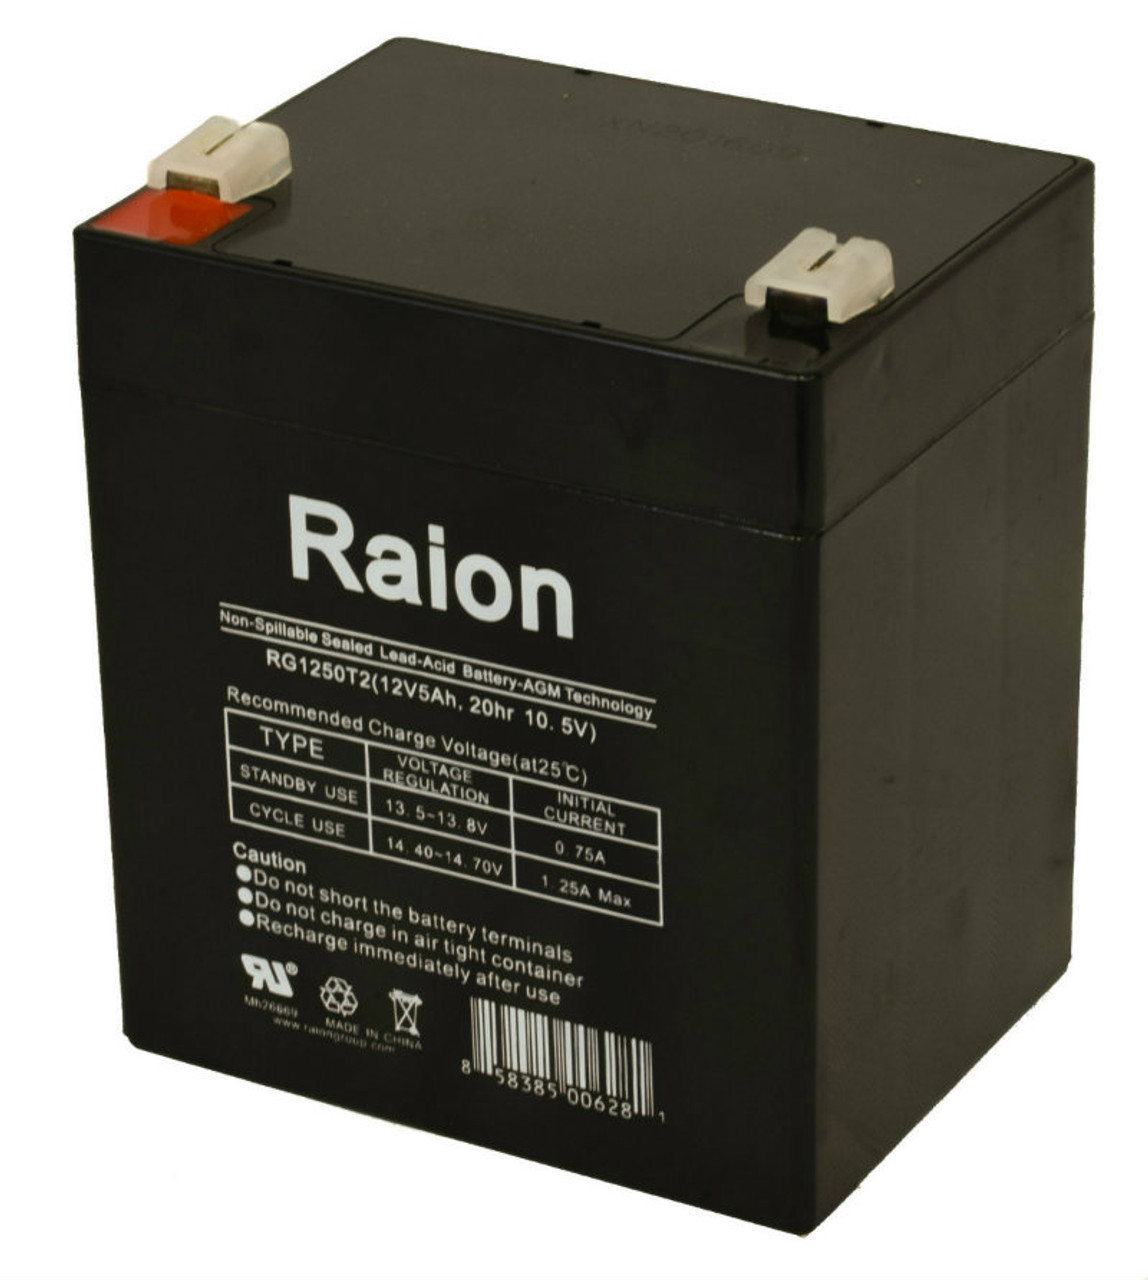 Raion Power RG1250T1 Replacement Battery for Park Medical Electronics Lab 311A Medical Printer